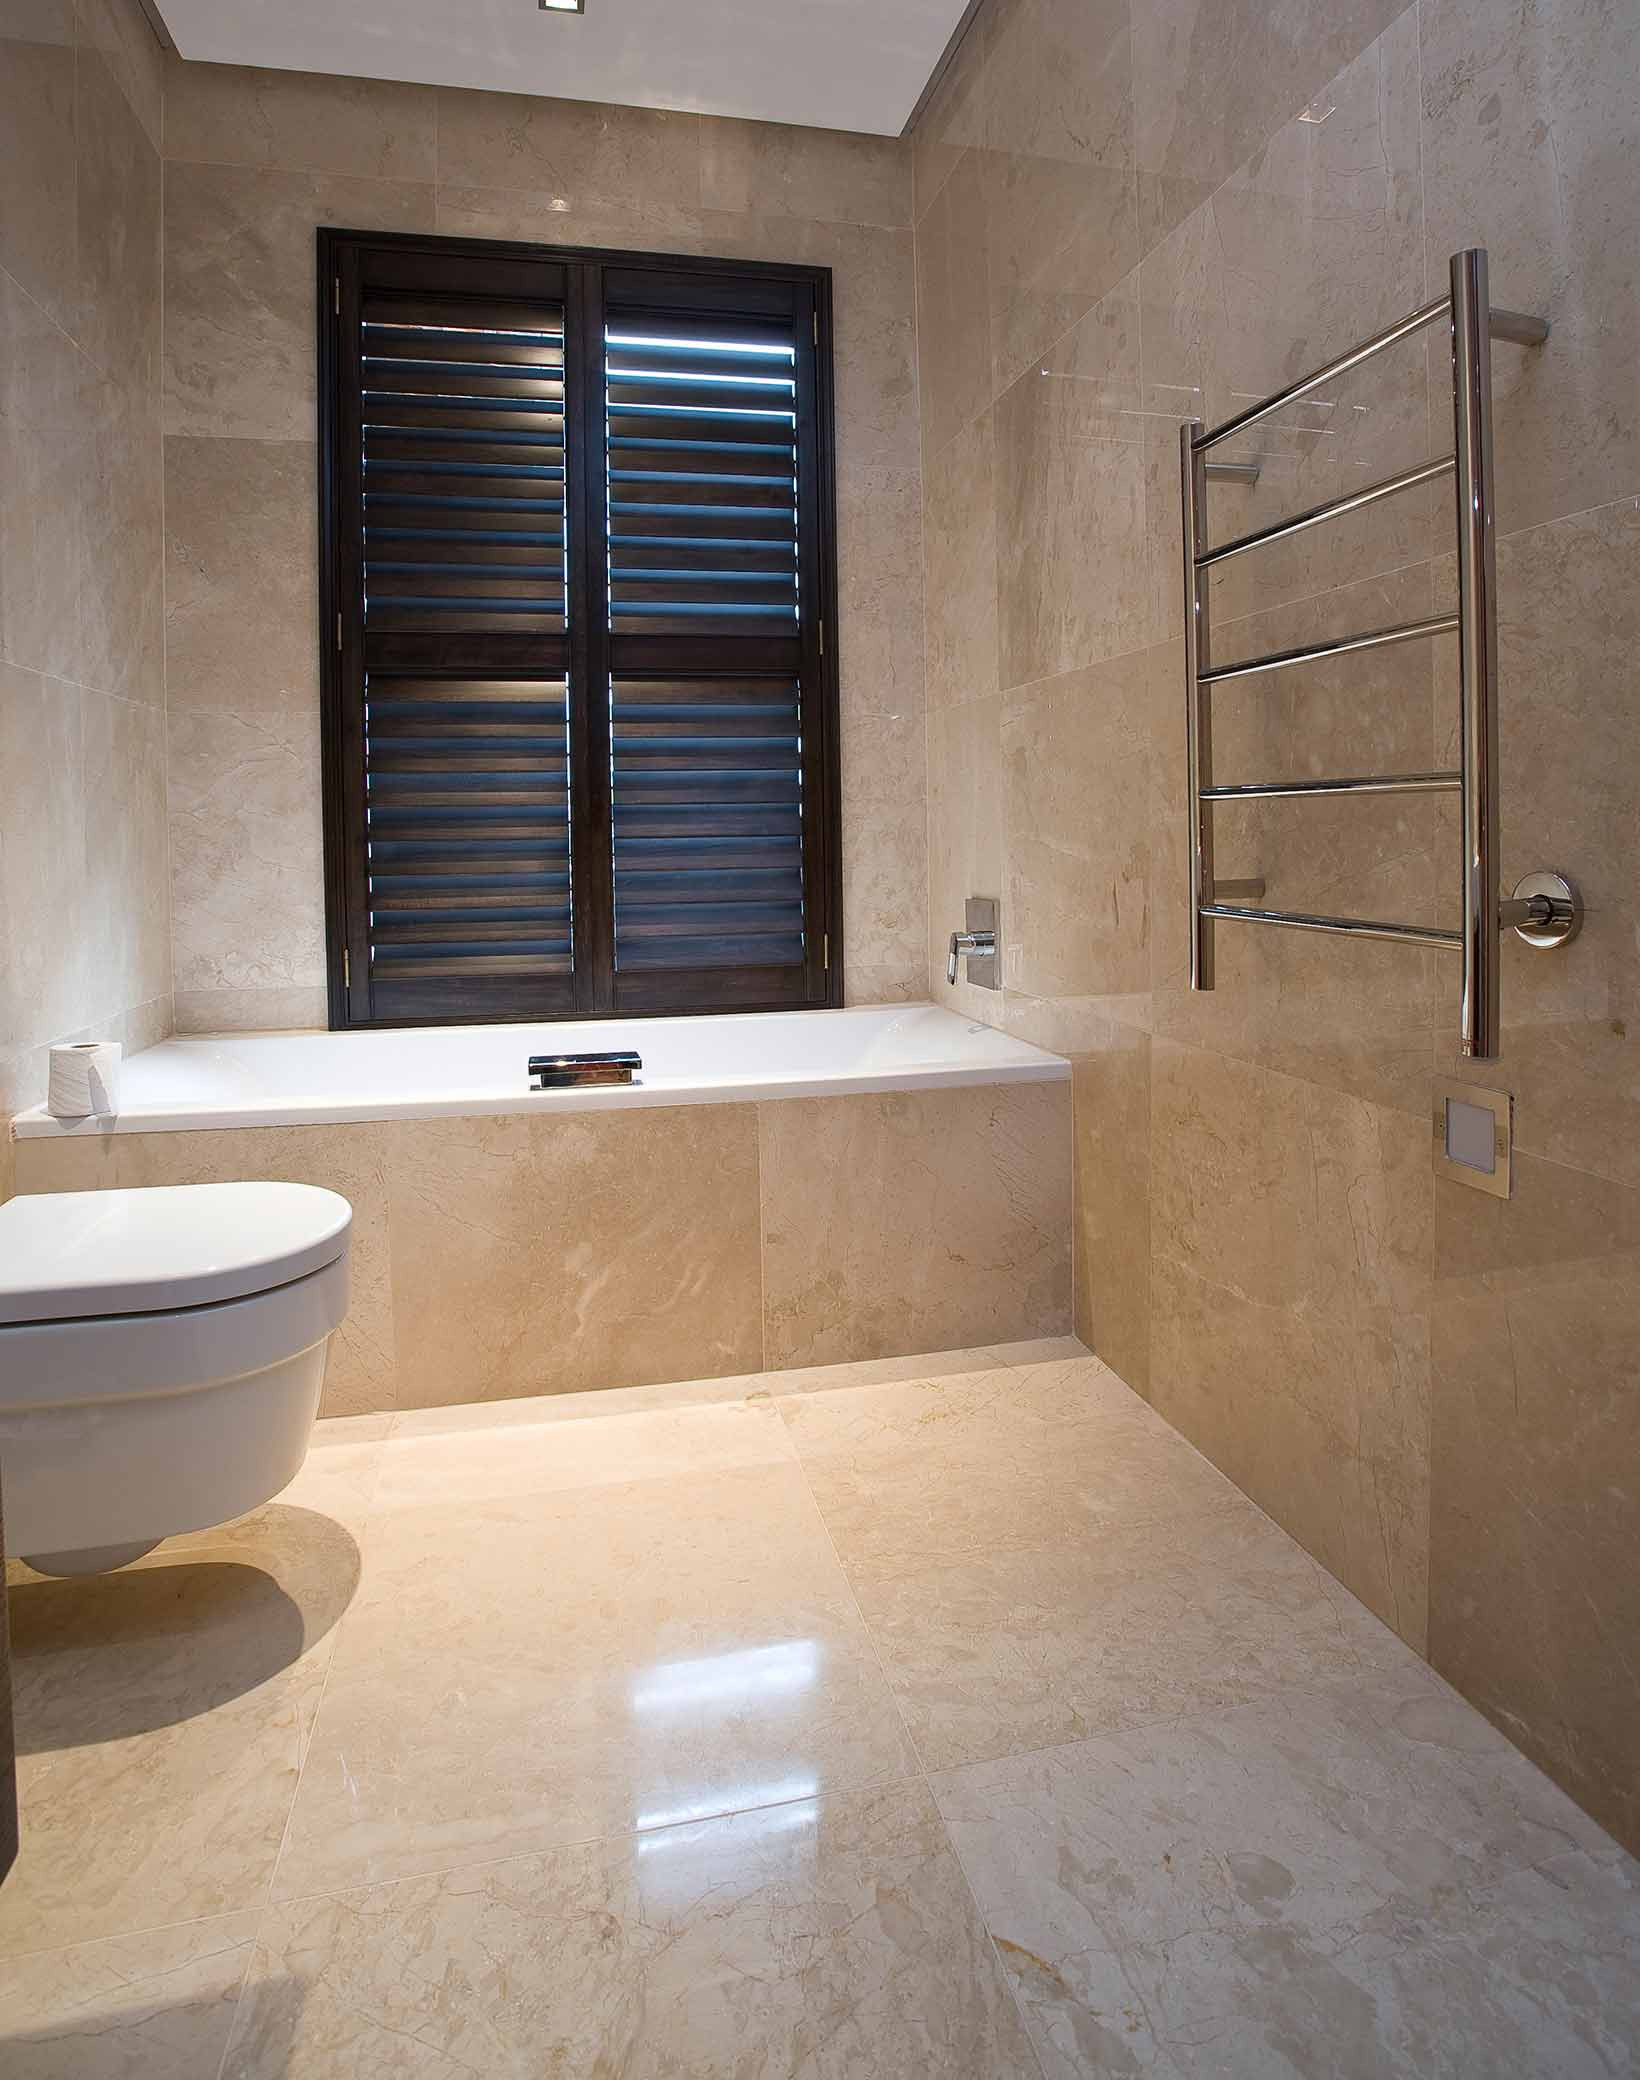 Bathroom Tiles Pictures
 Pool Tiles Coping Pavers Travertine Sydney supplying